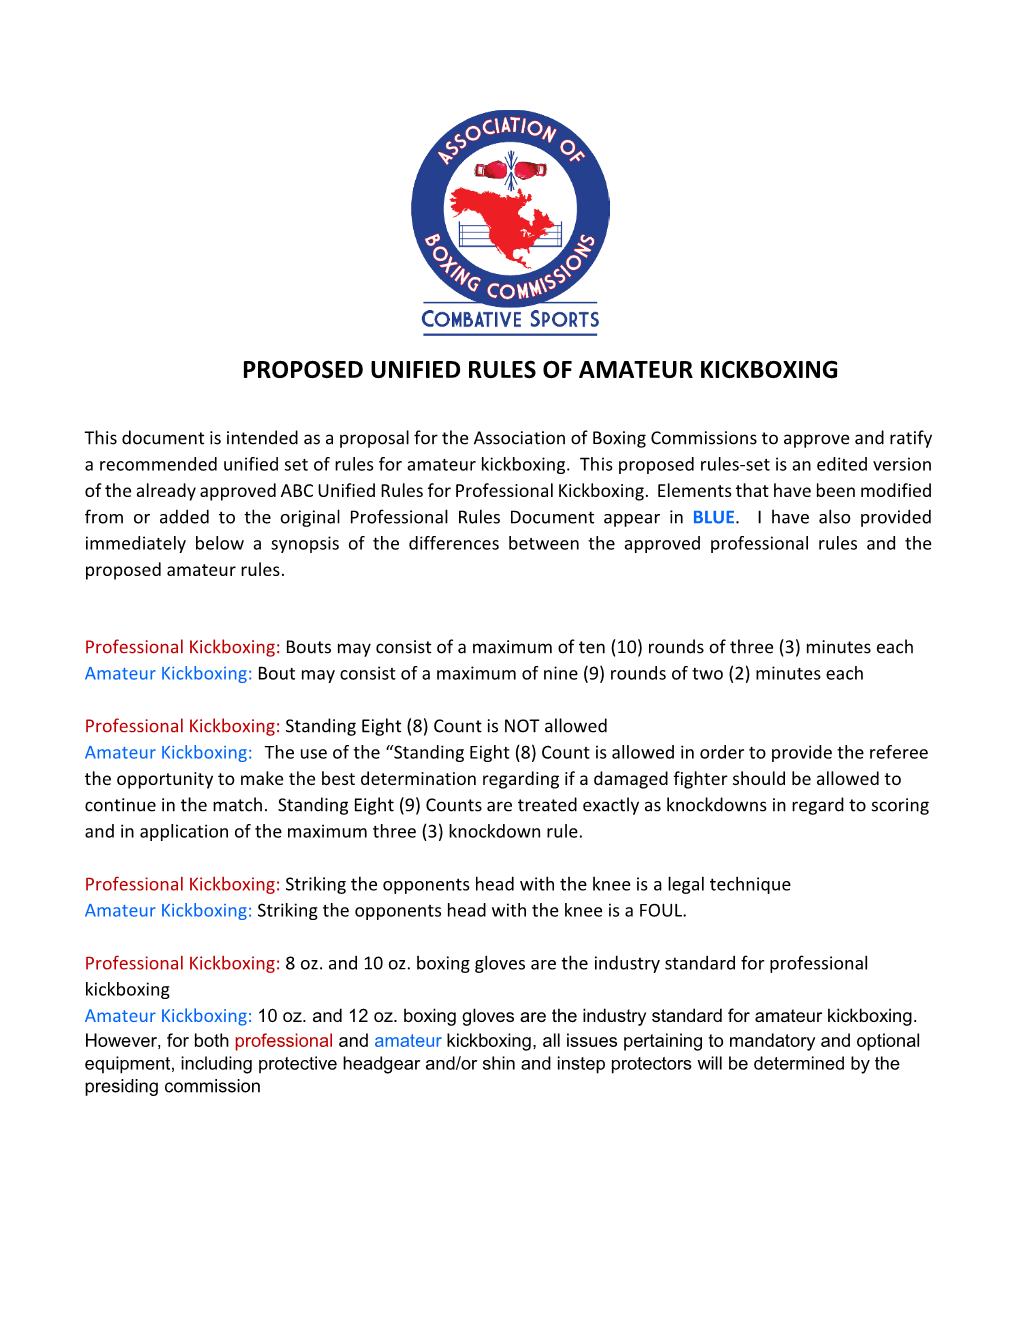 Proposed Unified Rules of Amateur Kickboxing